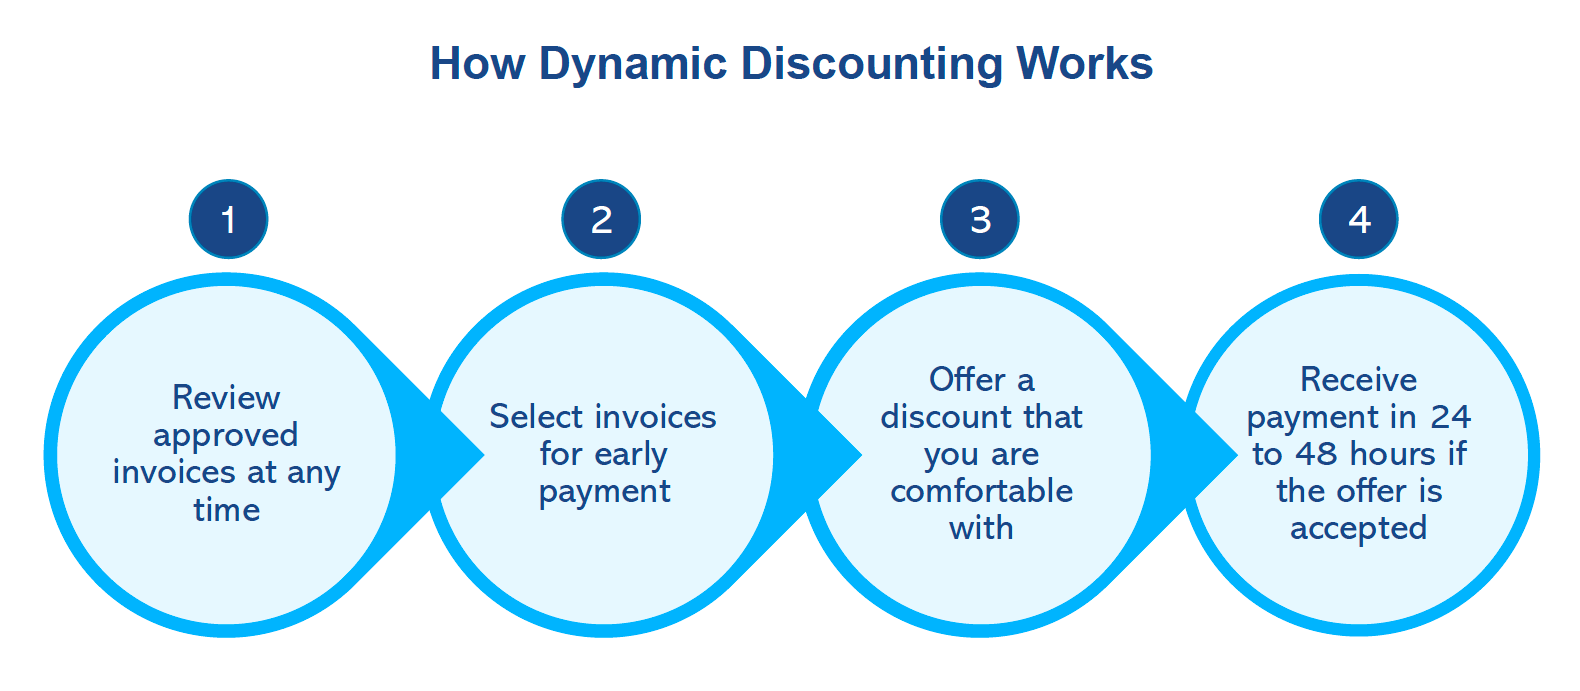 How Dynamic Discounting Works